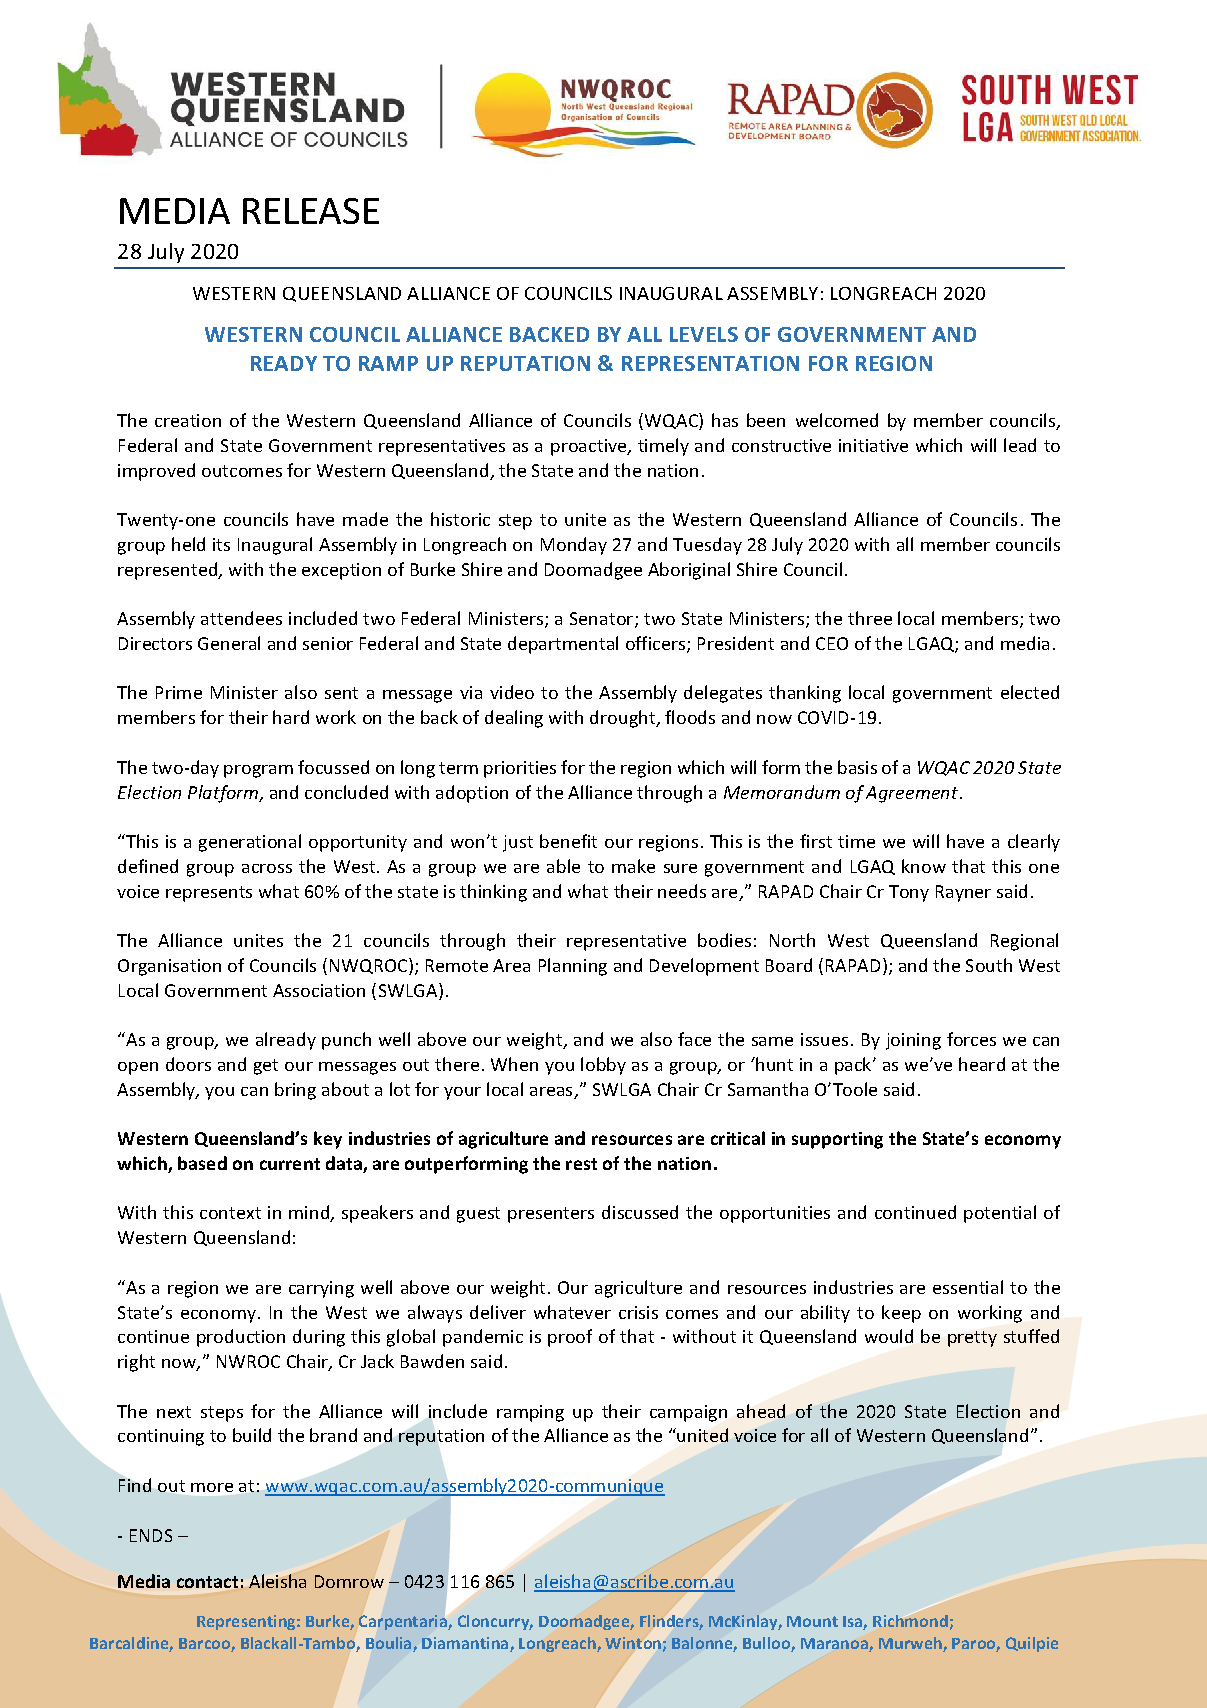 Wqac Media Release Western Alliance Backed By All Levels Of Government